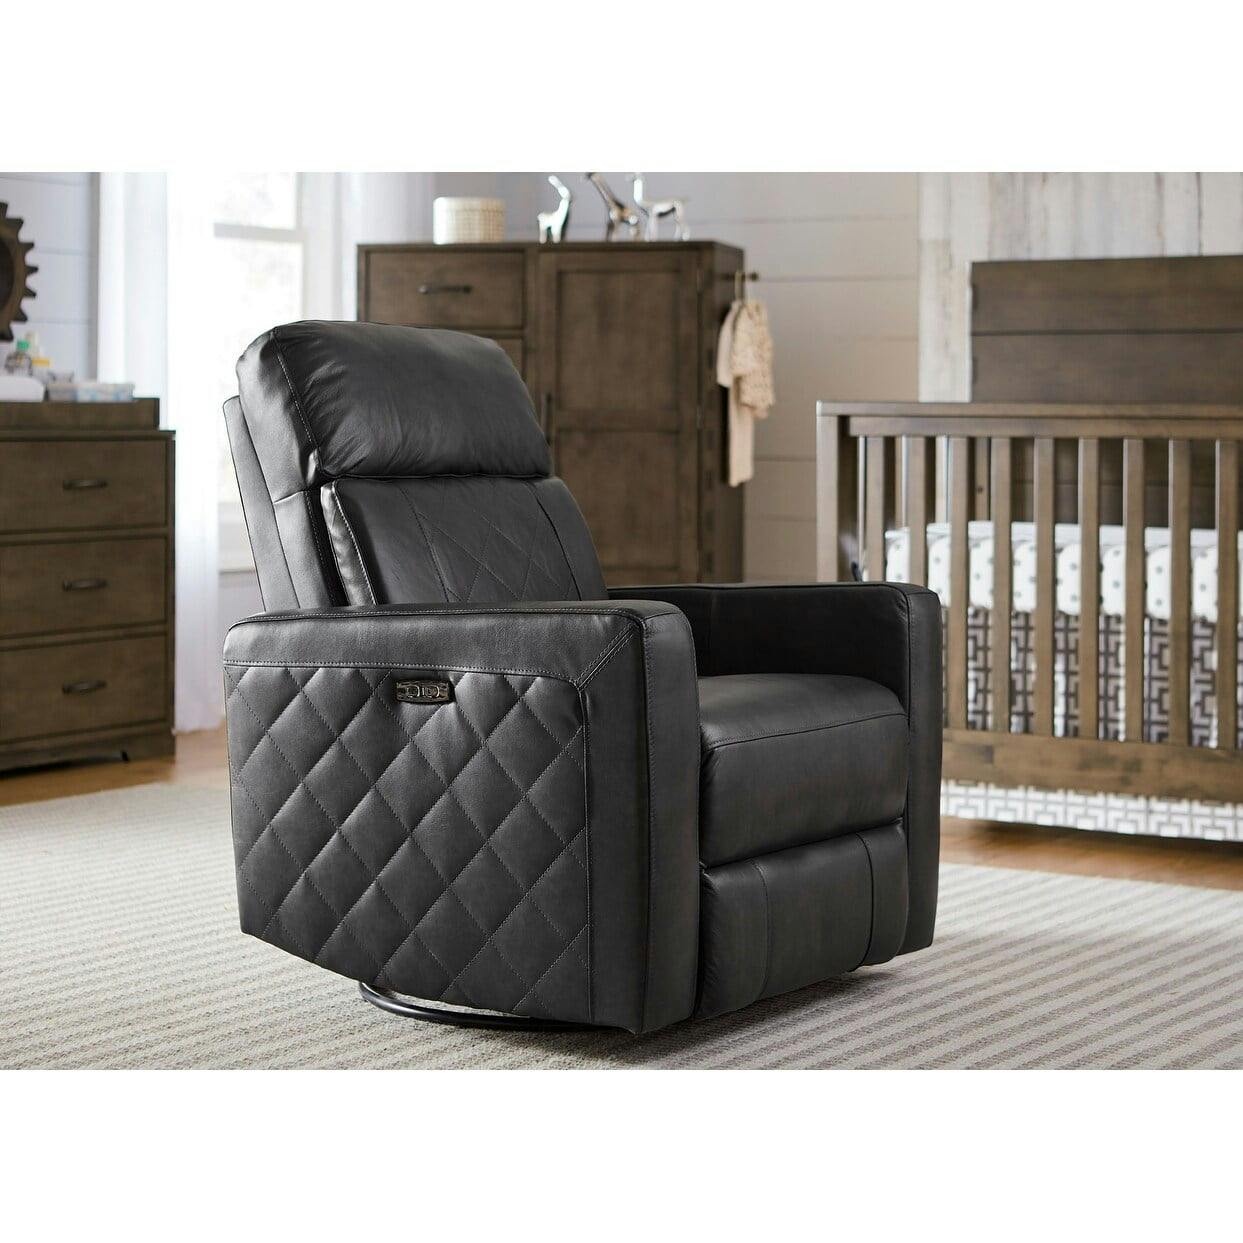 Soho Oxford Gray Leather Swivel Recliner with USB Charger